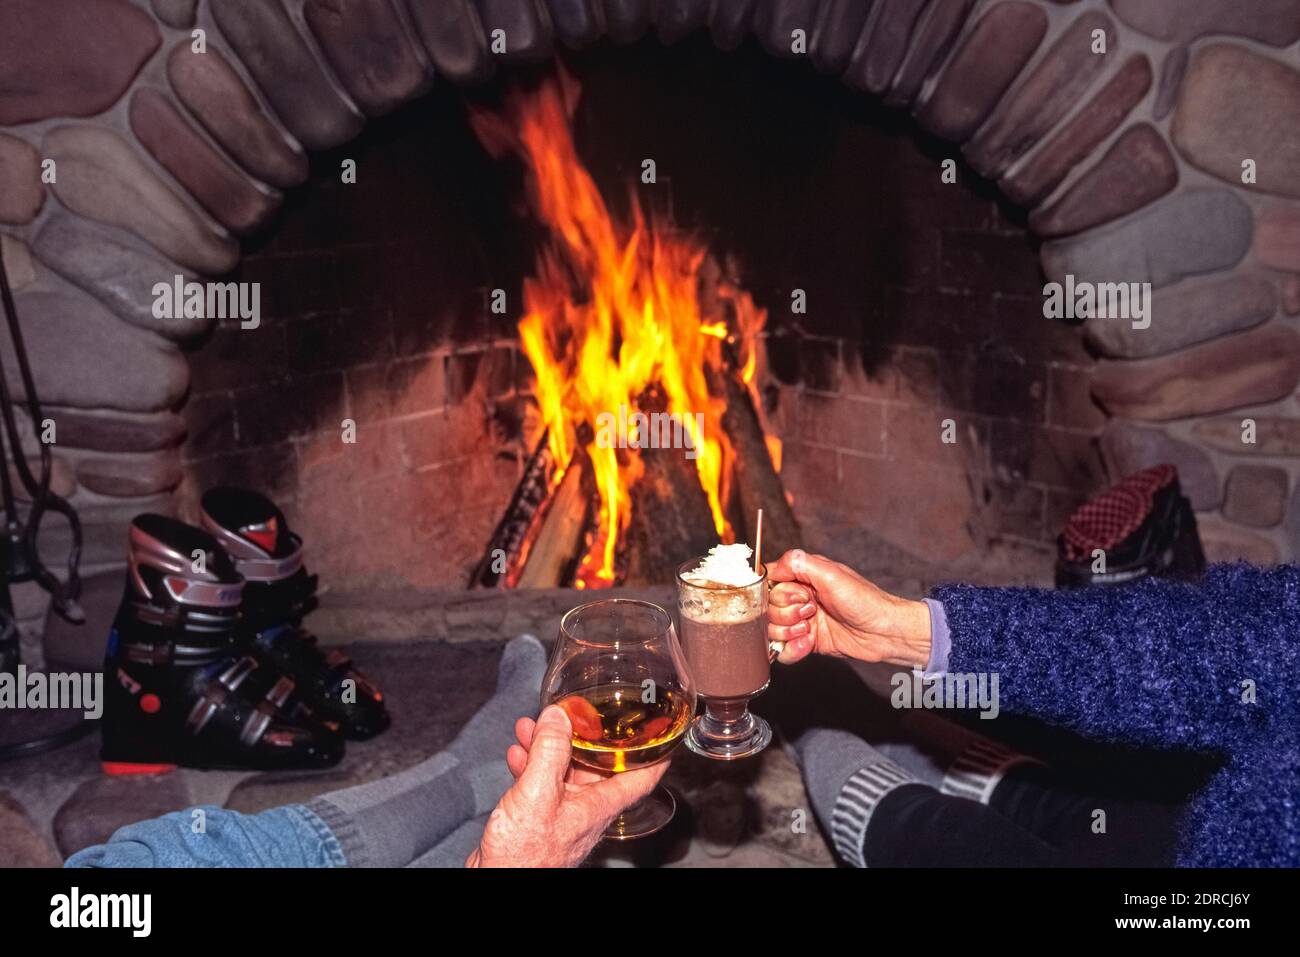 Two relaxed downhill skiers sit by a fireplace with their boots off and in stocking feet to toast each other with après-ski drinks and warm up in front of a blazing wood fire in a ski lodge at Big Sky Resort in Montana, USA. Brandy and hot chocolate are among America's most popular after-ski drinks, along with mulled wine, Irish coffee, hot buttered rum, and spiced apple cider. Big Sky is the largest of all ski resorts in that  Northwestern state and boasts 31 ski lifts that give easy access to Rocky Mountain slopes with more than 300 ski runs for beginning, intermediate and expert skiers. Stock Photo